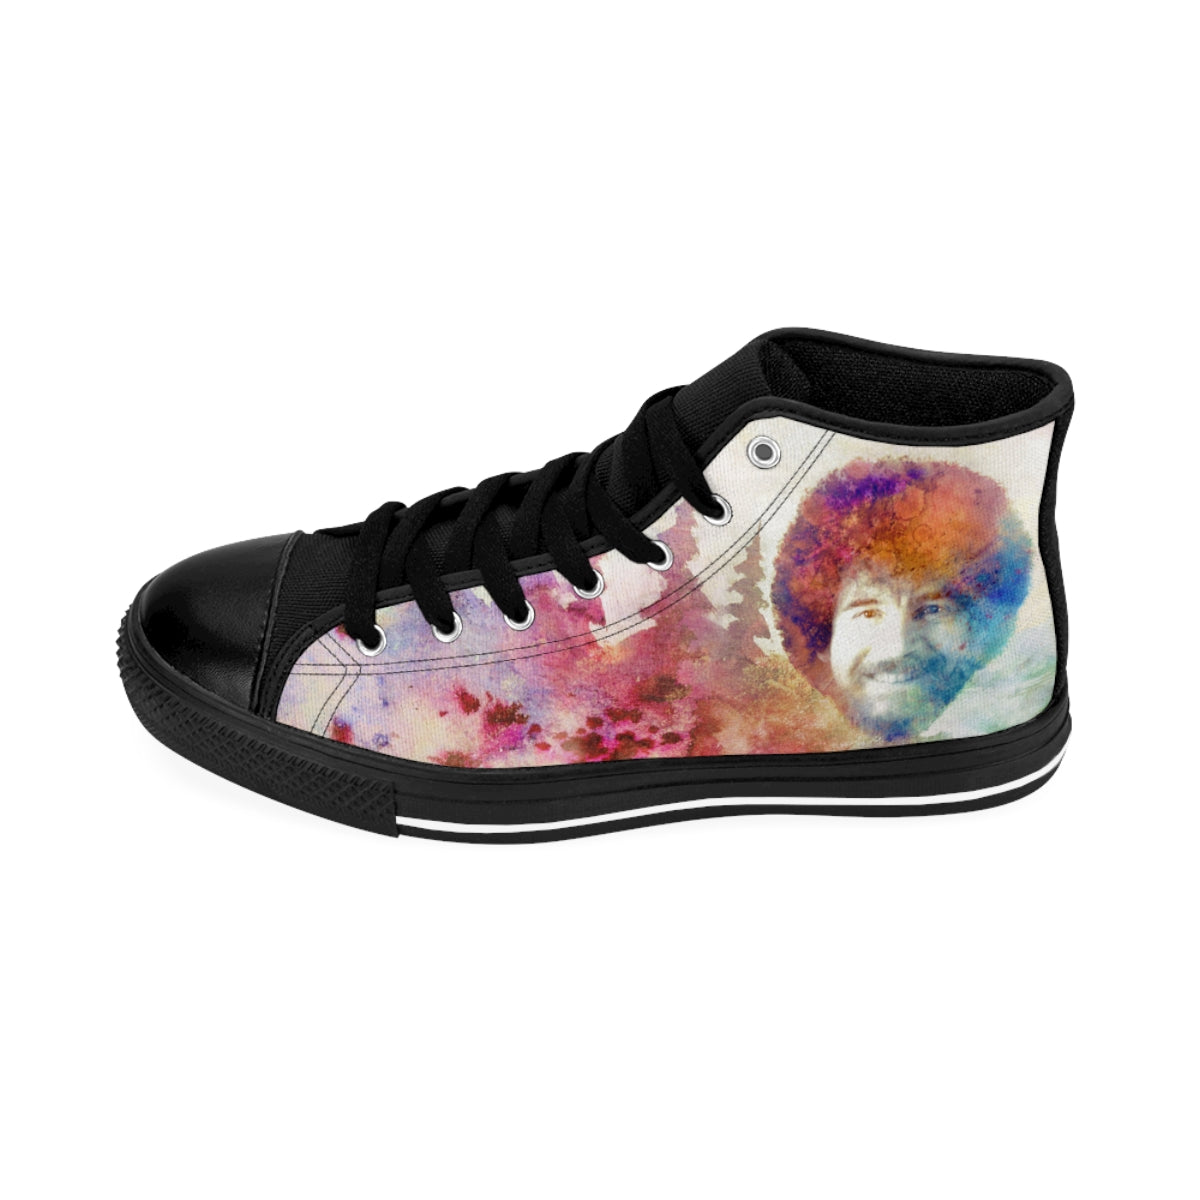 Bob Ross Tribute Shoes | High-top canvas Sneakers (Men's Sizes)